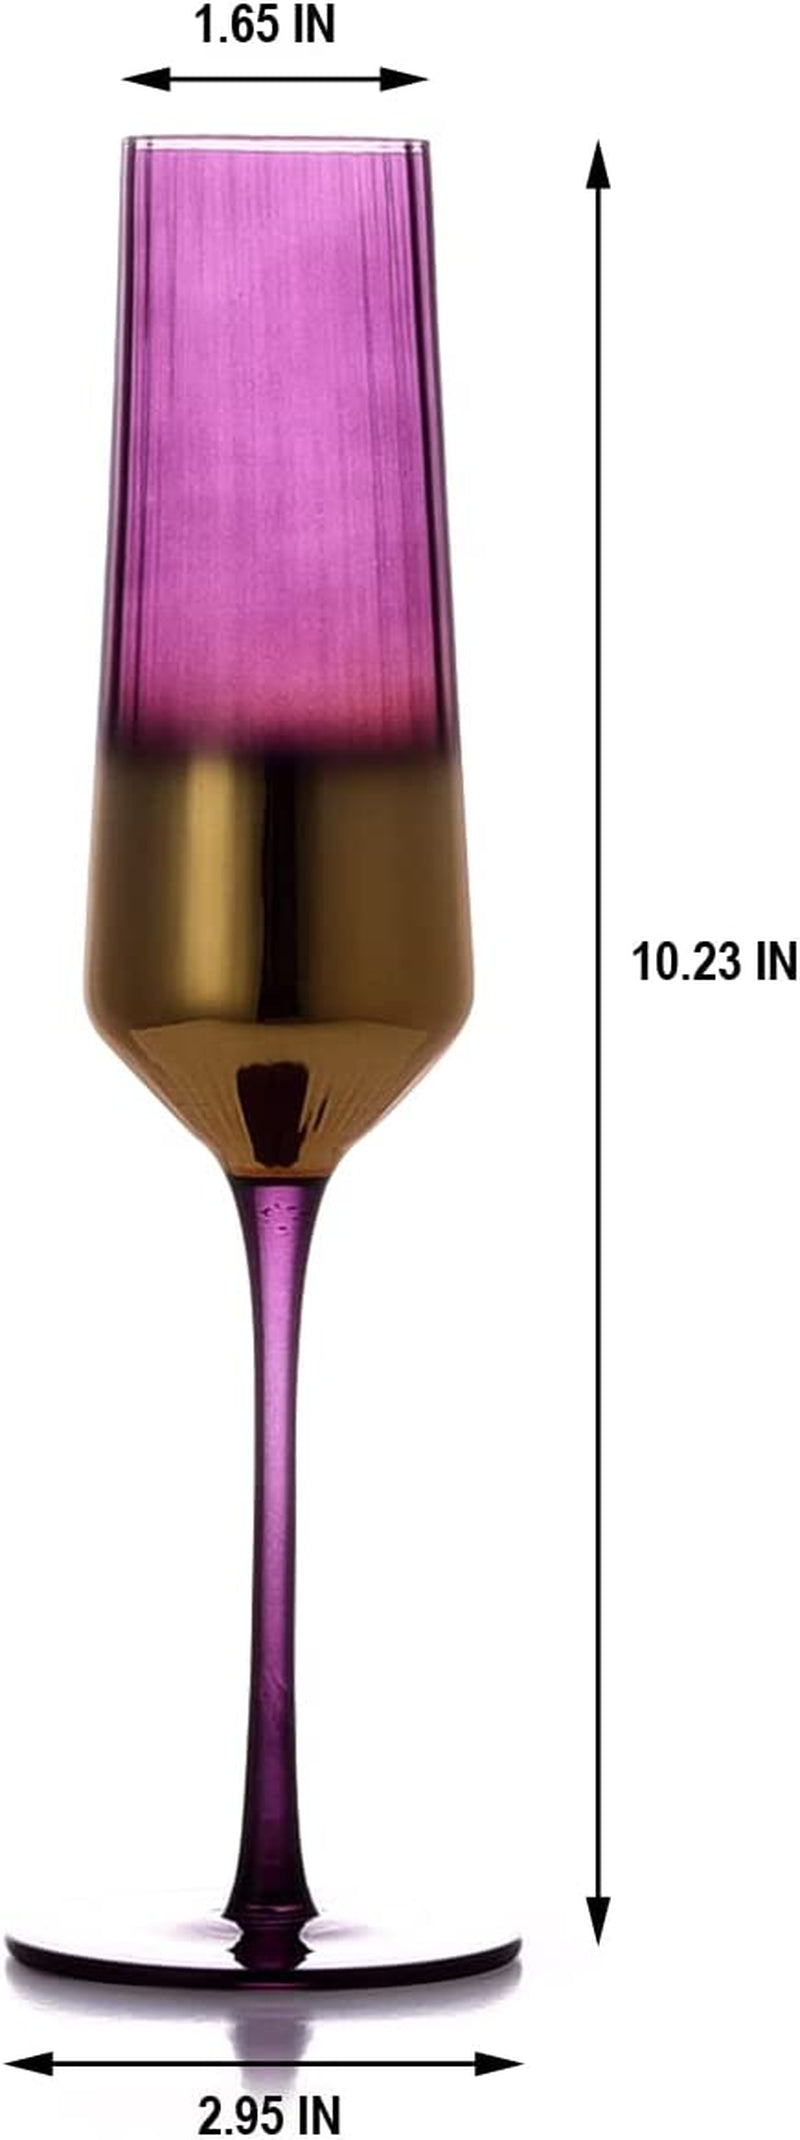 Glass Champagne Flutes Set of 4-Hand Blown Crystal Champagne Glasses-8.5 OZ Purple and Gold Gradient Design Drinkware for Wedding Birthday Anniversary Party